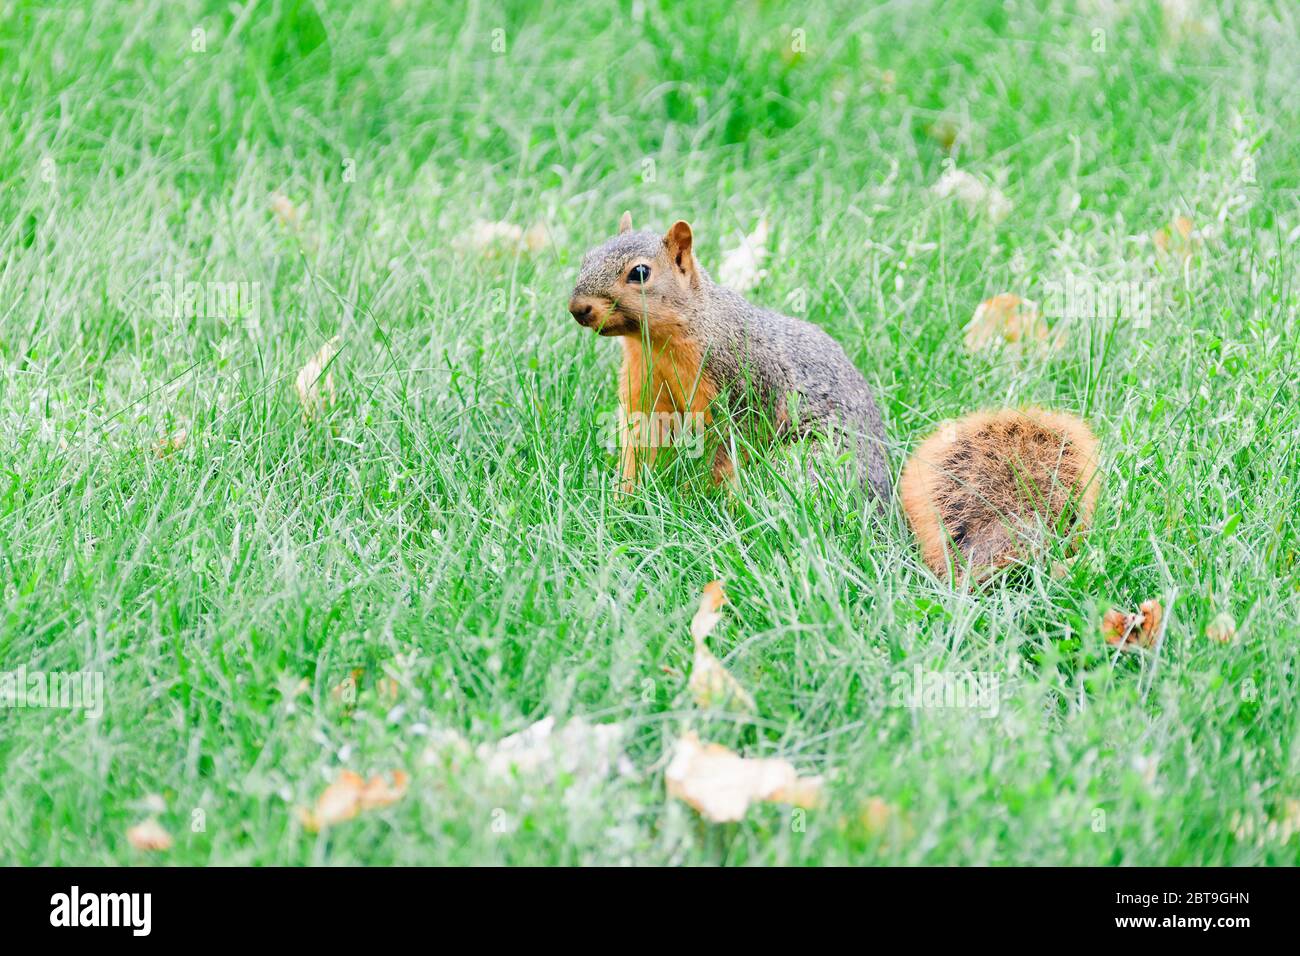 a squirrel sitting in the tall Illinois grass watching intently Stock Photo